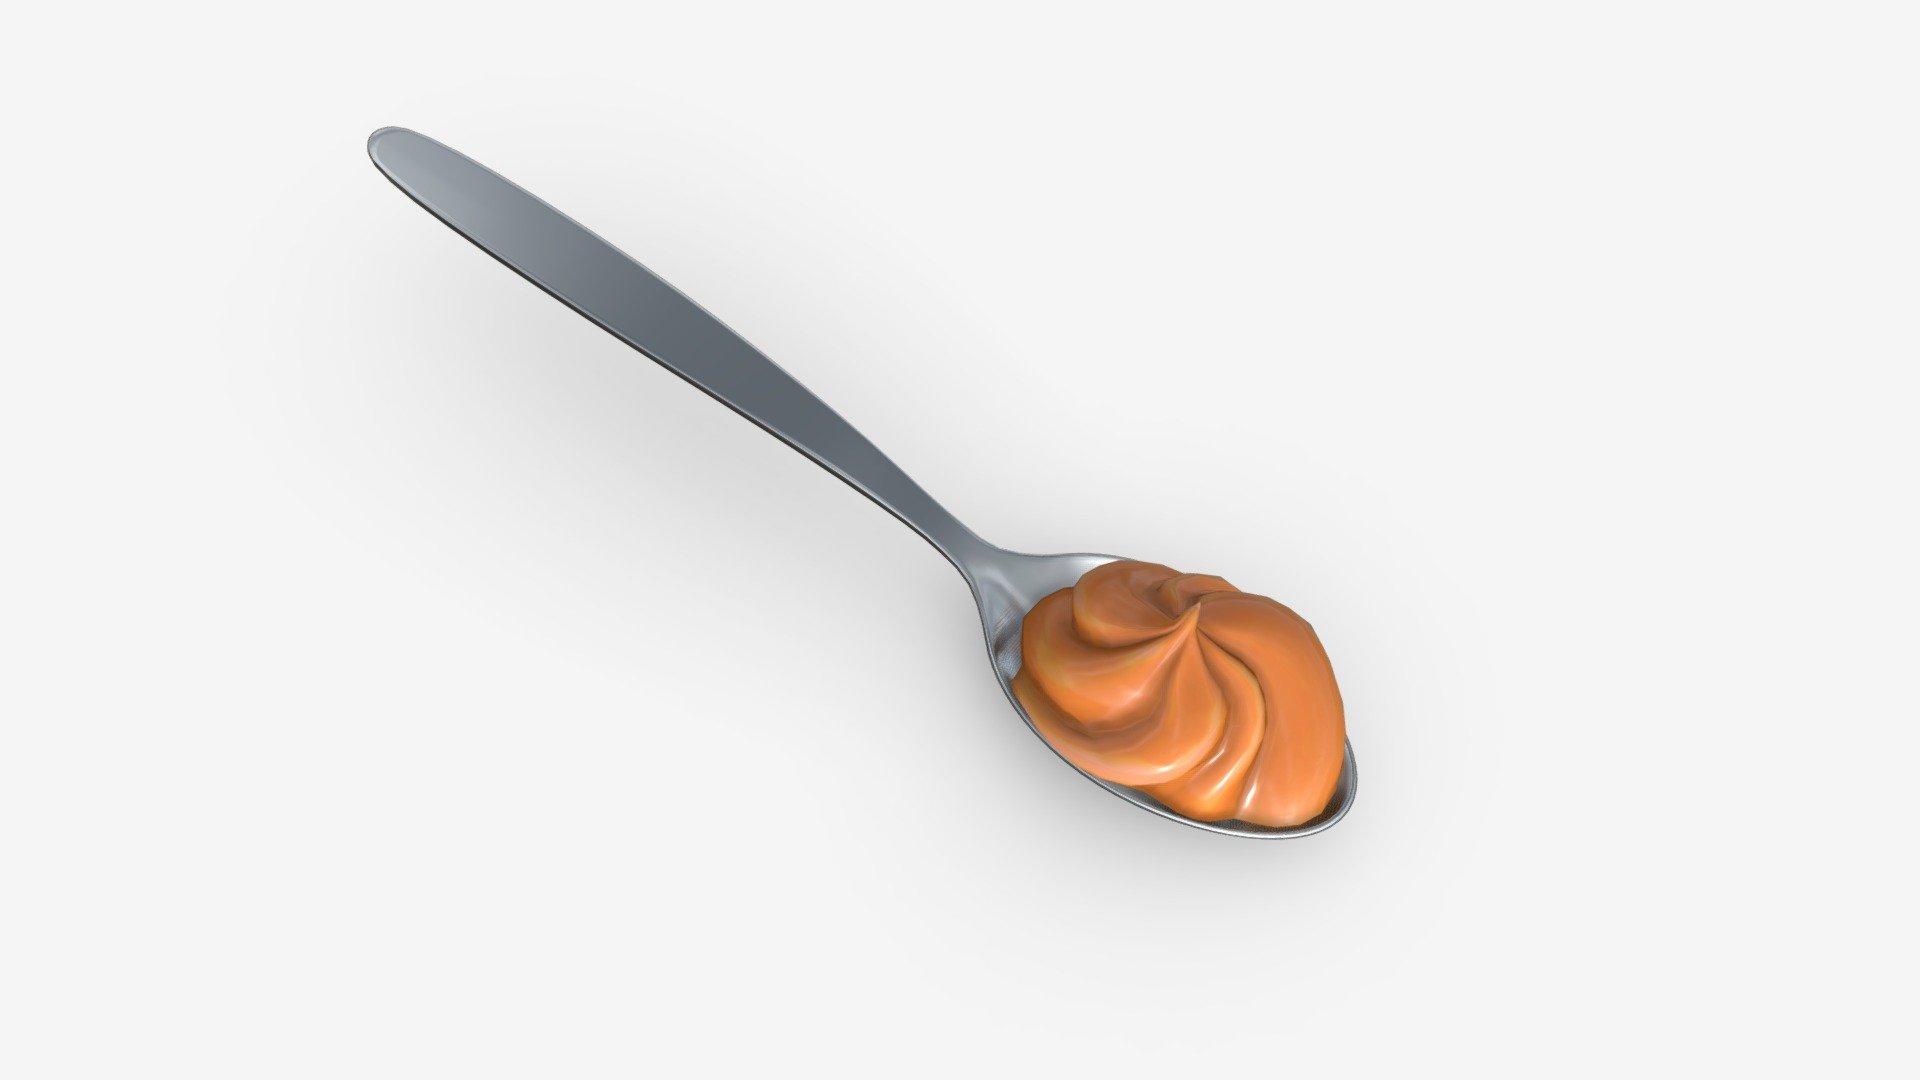 Metal Tea Spoon with Melted Caramel - Buy Royalty Free 3D model by HQ3DMOD (@AivisAstics) 3d model